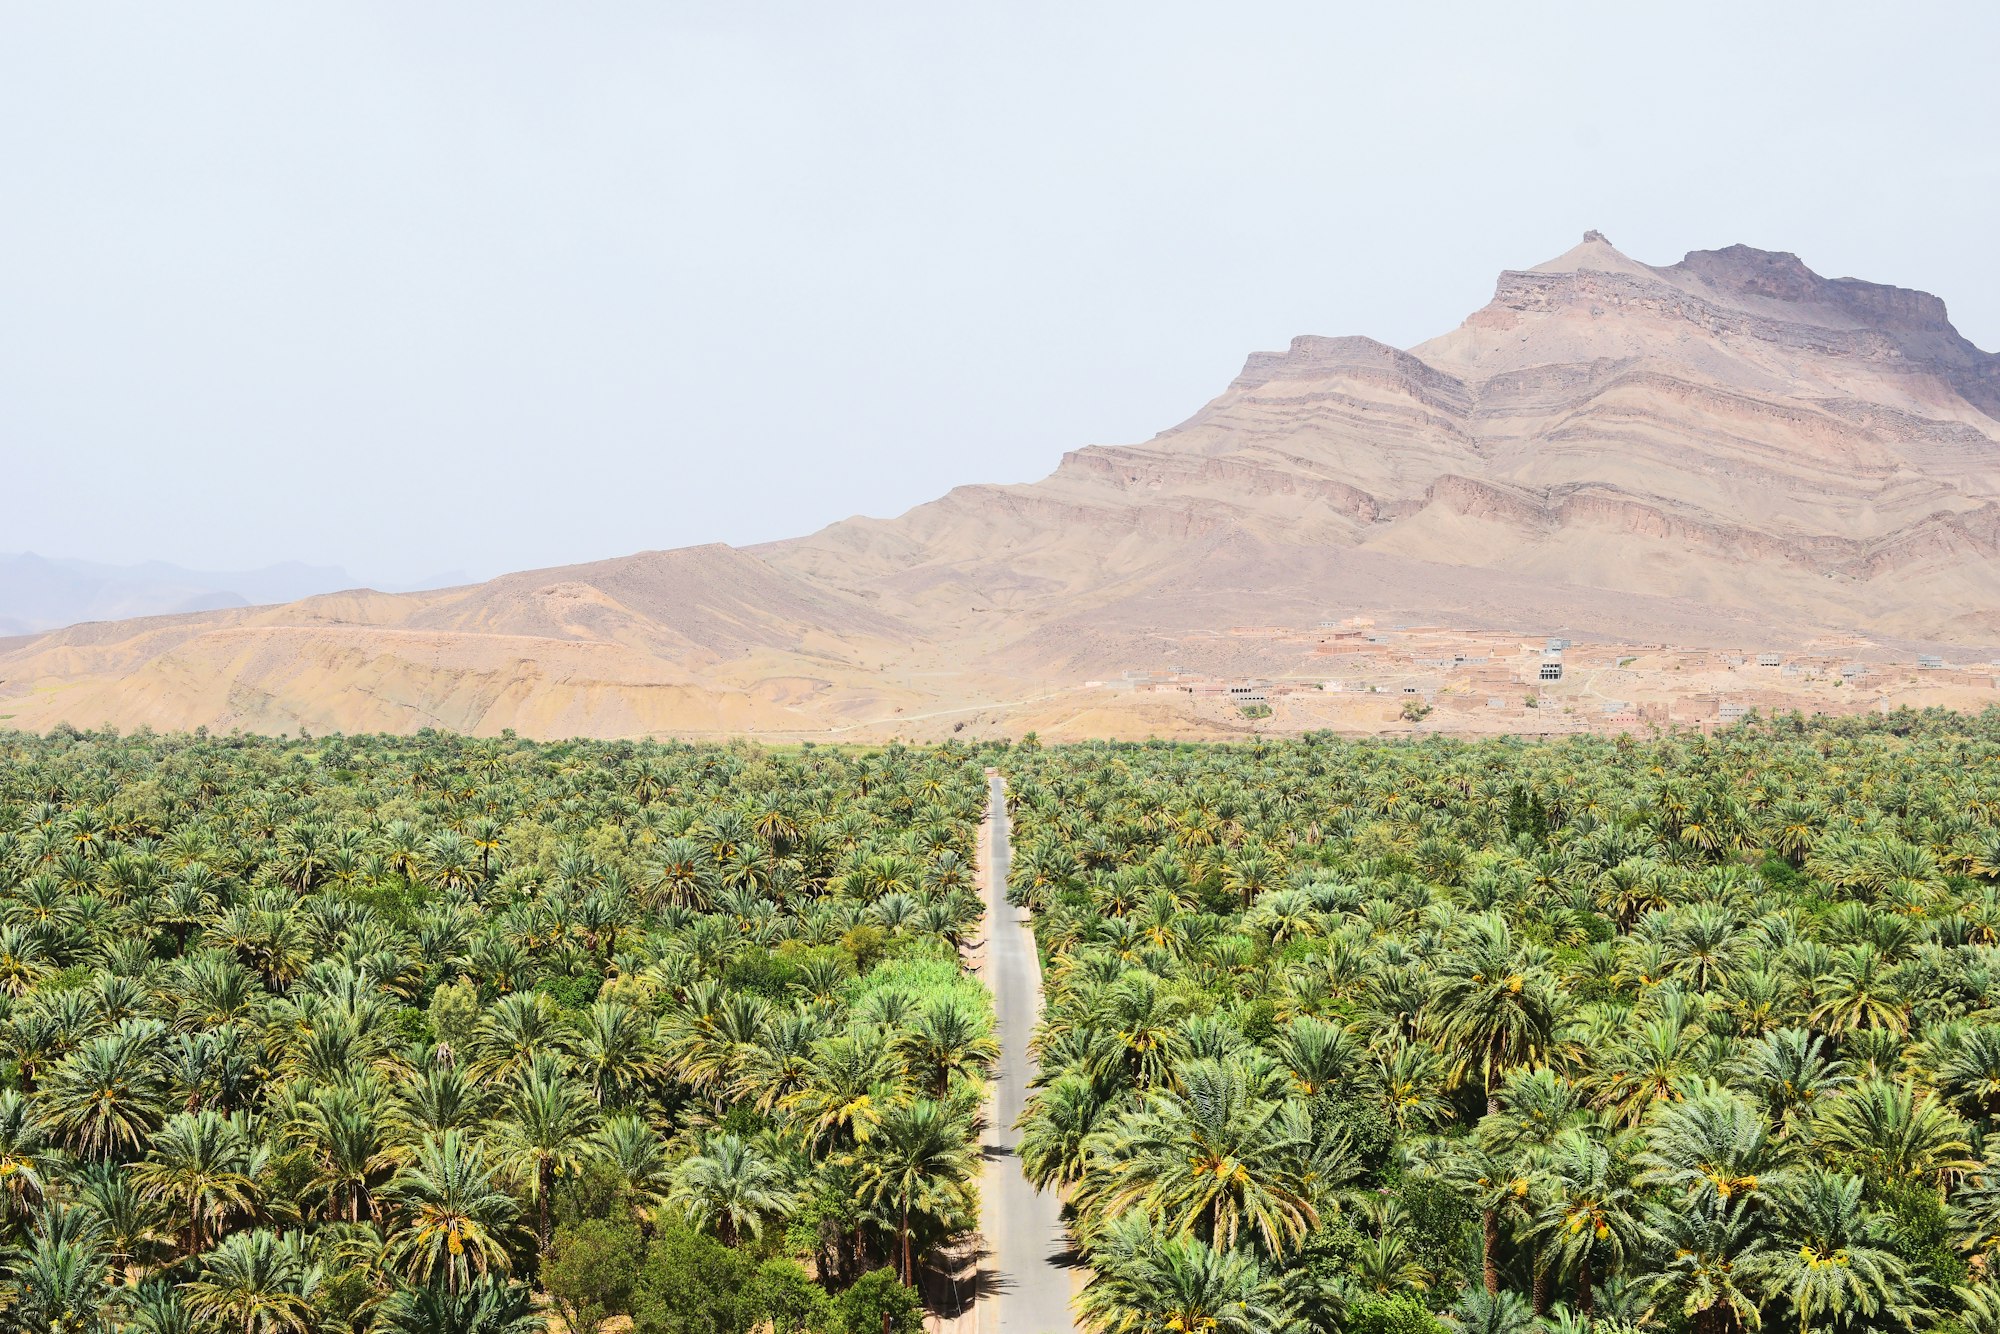 Whilst on a tour through the Moroccan desert, we stopped to overlook the oasis of palm trees in the Draa Valley.